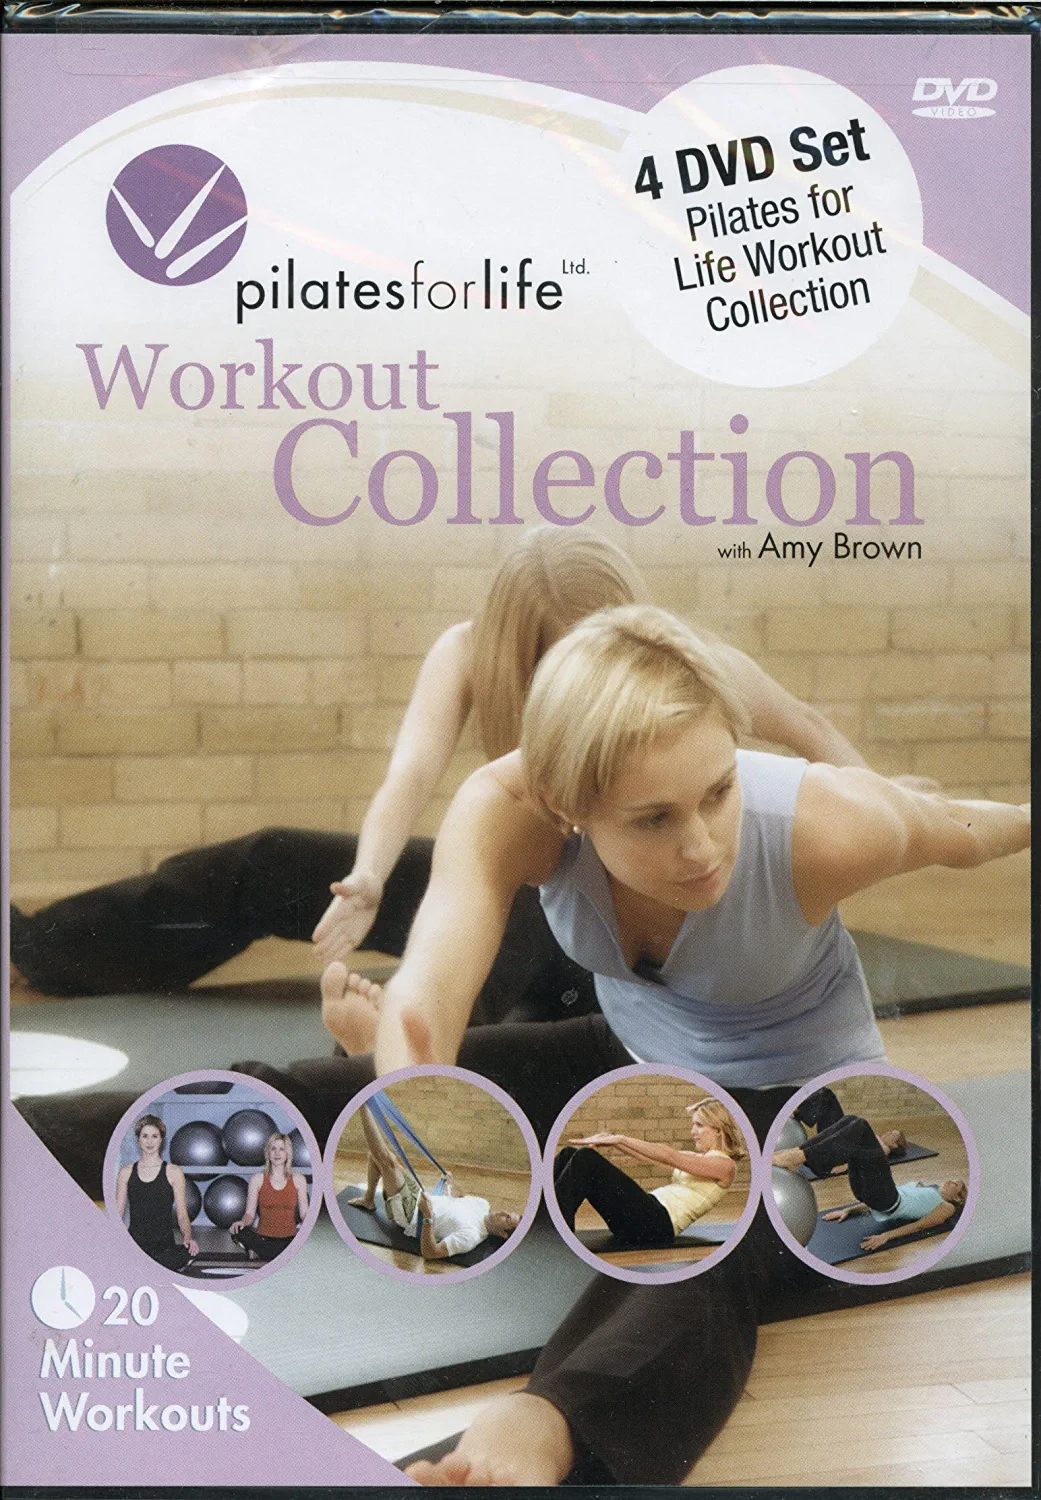 Pilates for Life Workout Collection 4 DVD Set with Amy Brown (DVD)